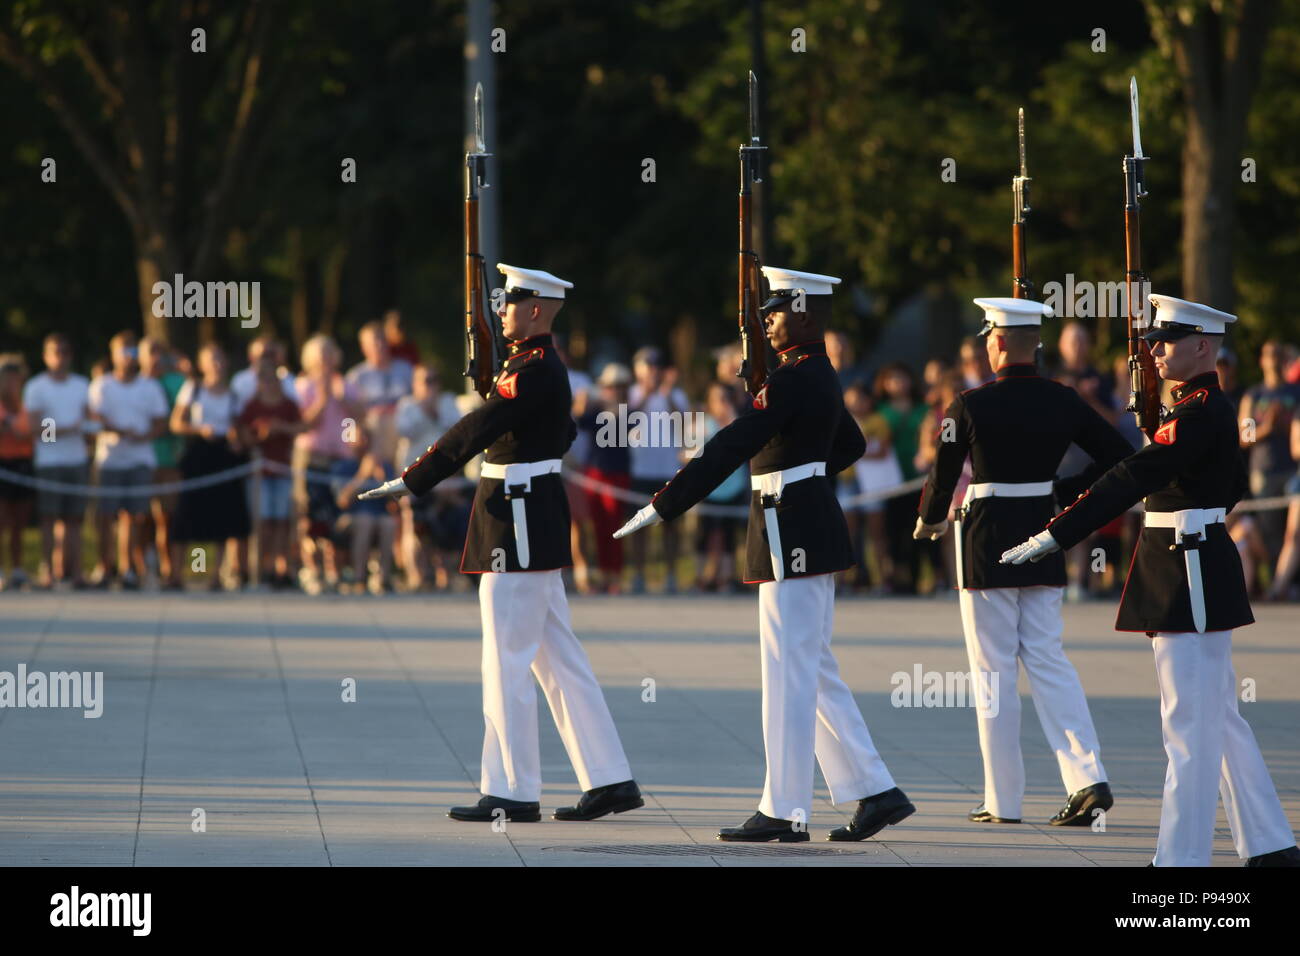 Marines with the U.S. Marine Corps Silent Drill Platoon execute precision rifle drill movements during a Tuesday Sunset Parade at the Lincoln Memorial, Washington D.C., July 10, 2018. The guest of honor for the parade was the former Vice President of the U.S., Joe Biden, and the hosting official was the Staff Judge Advocate to the Commandant of the Marine Corps, Maj. Gen. John R. Ewers Jr. (Official Marine Corps photo by LCpl Bourgeois/Released) Stock Photo